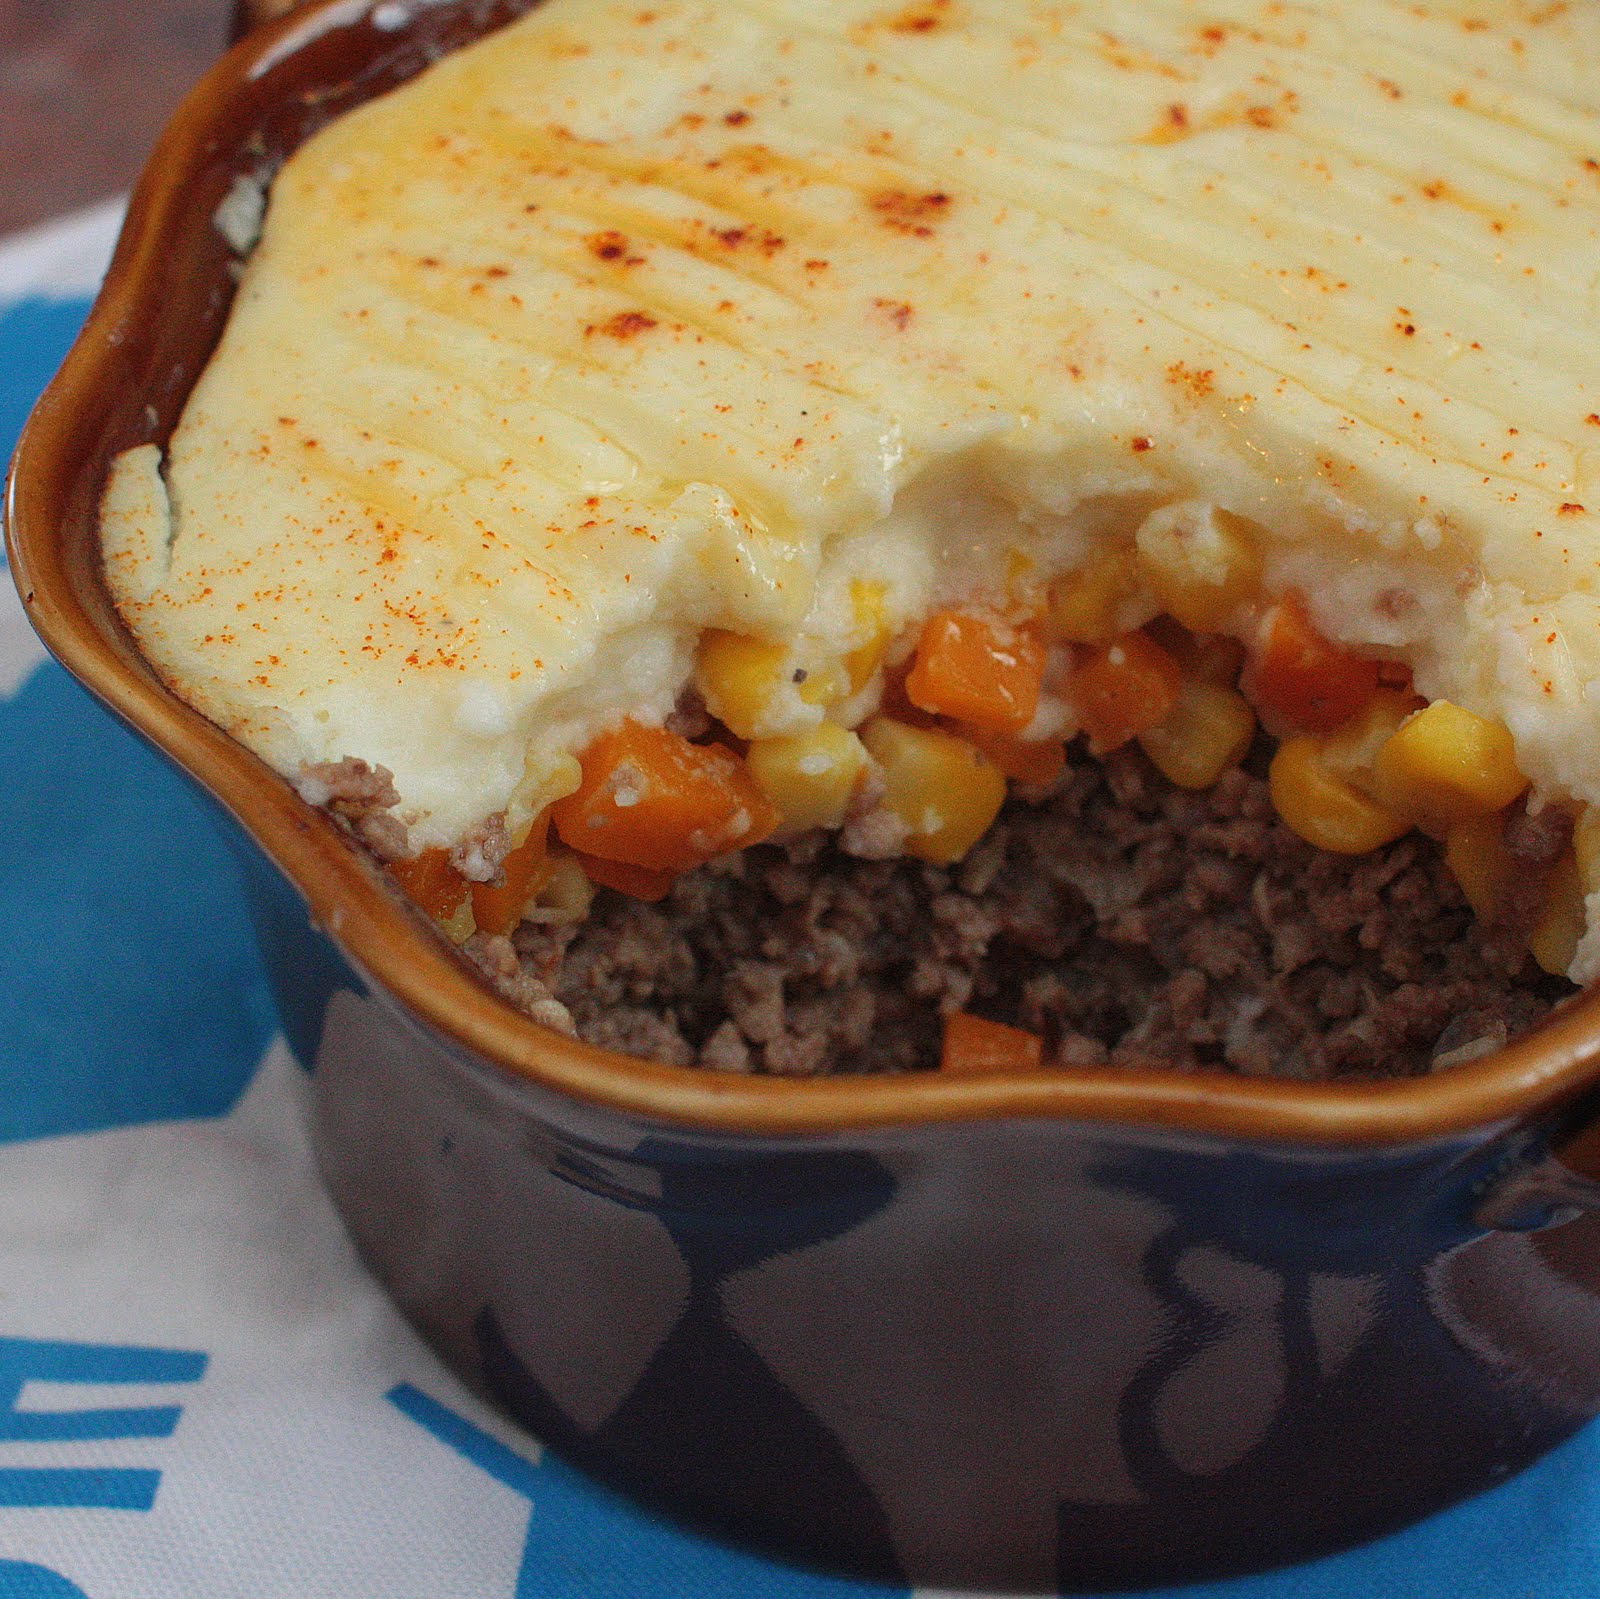 The Beef Chronicles: Shepherd’s Pie with Cauliflower Purée